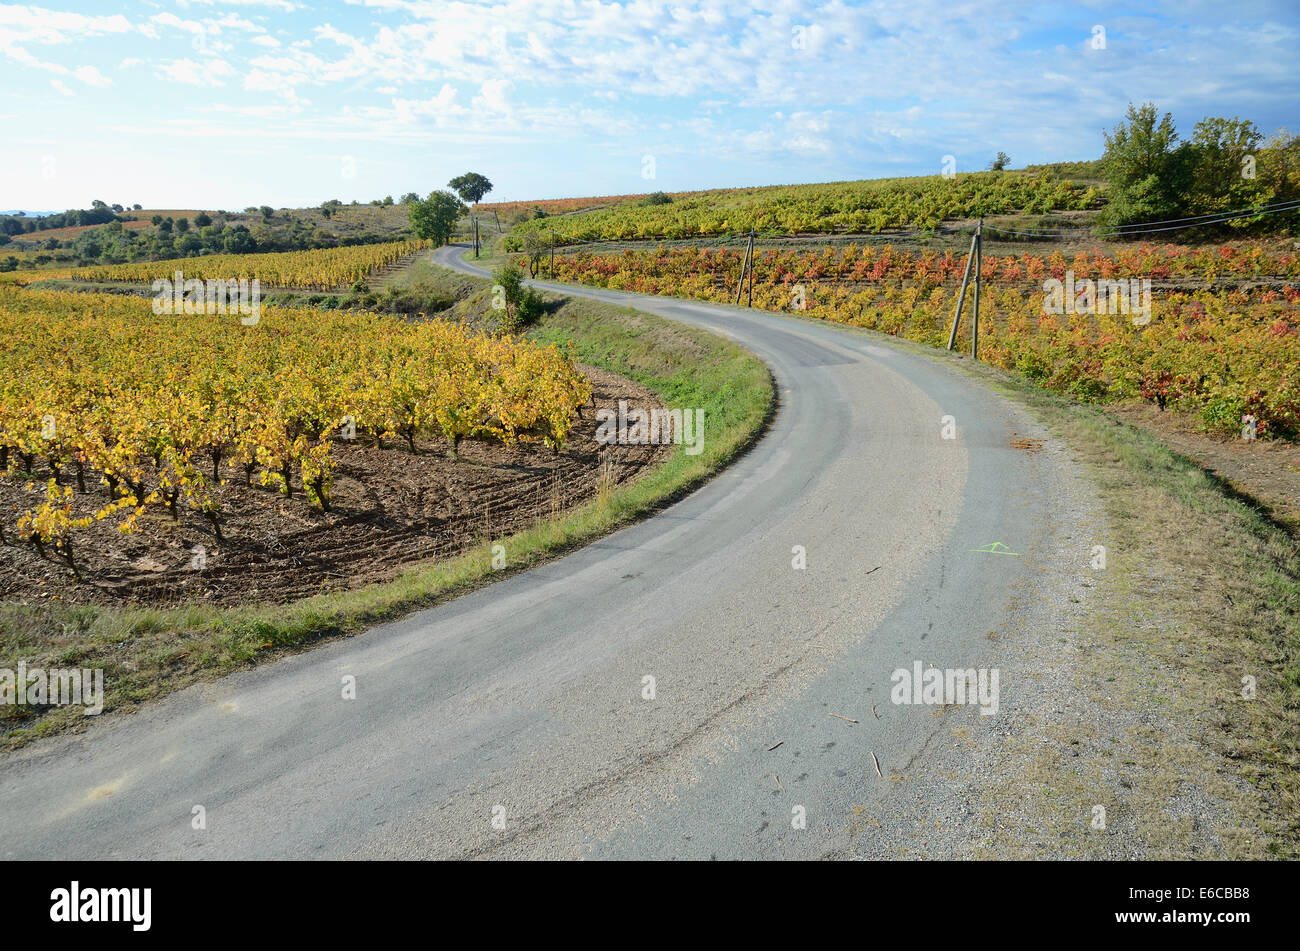 Road by vineyards with fall foliage, AOC Faugeres, Herault, France, Europe Stock Photo